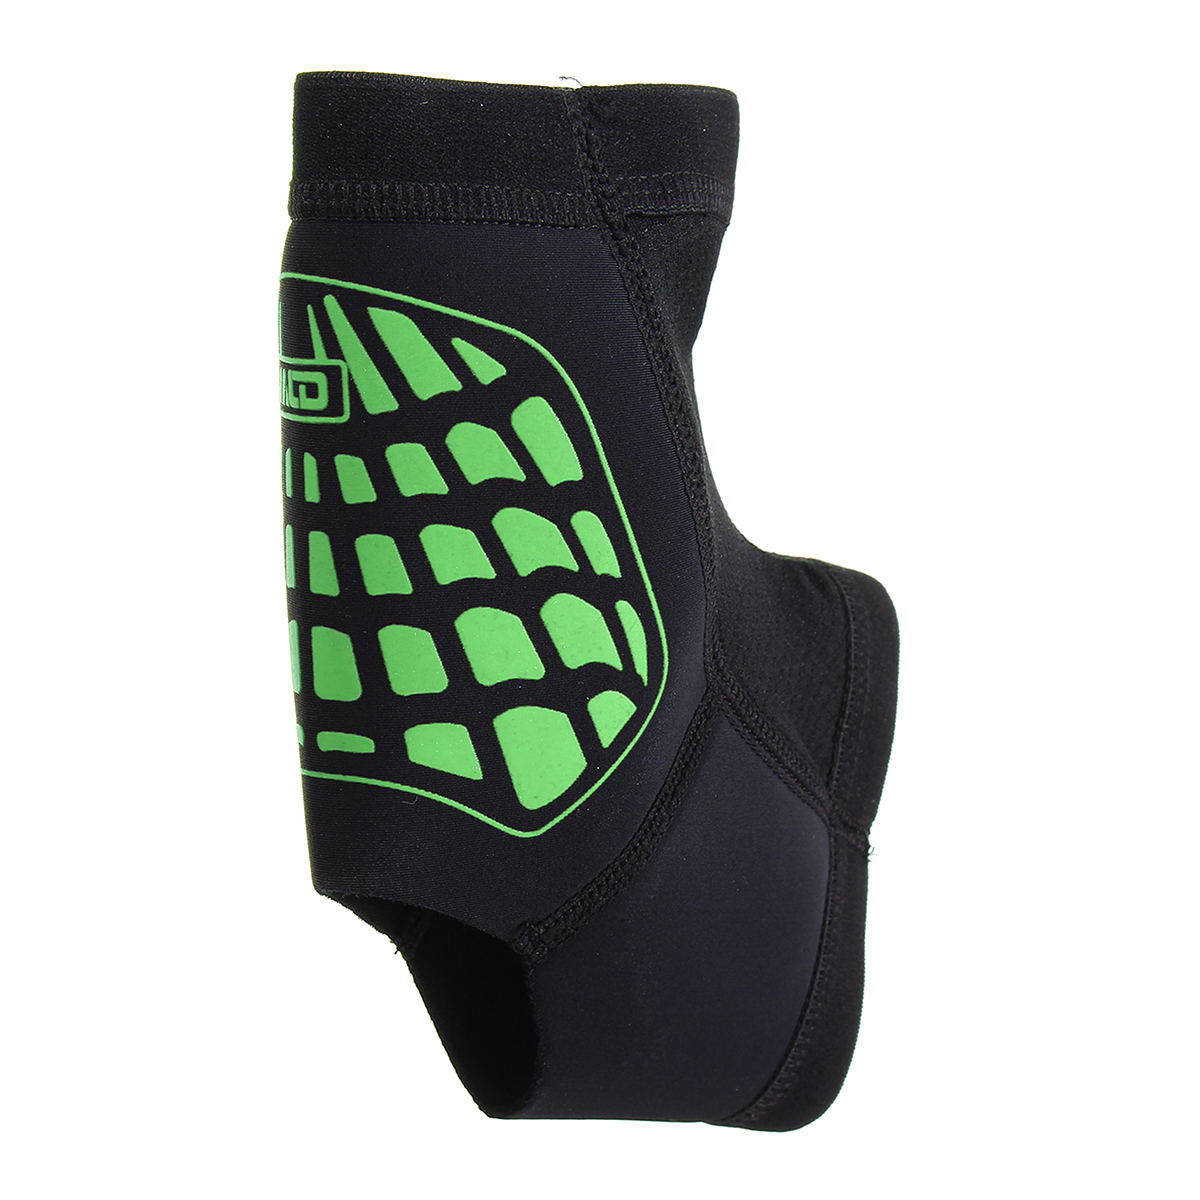 Single-Basketball-Cycling-Running-Ankle-Pad-Brace-Sports-Exercise-Protector-1130134-8